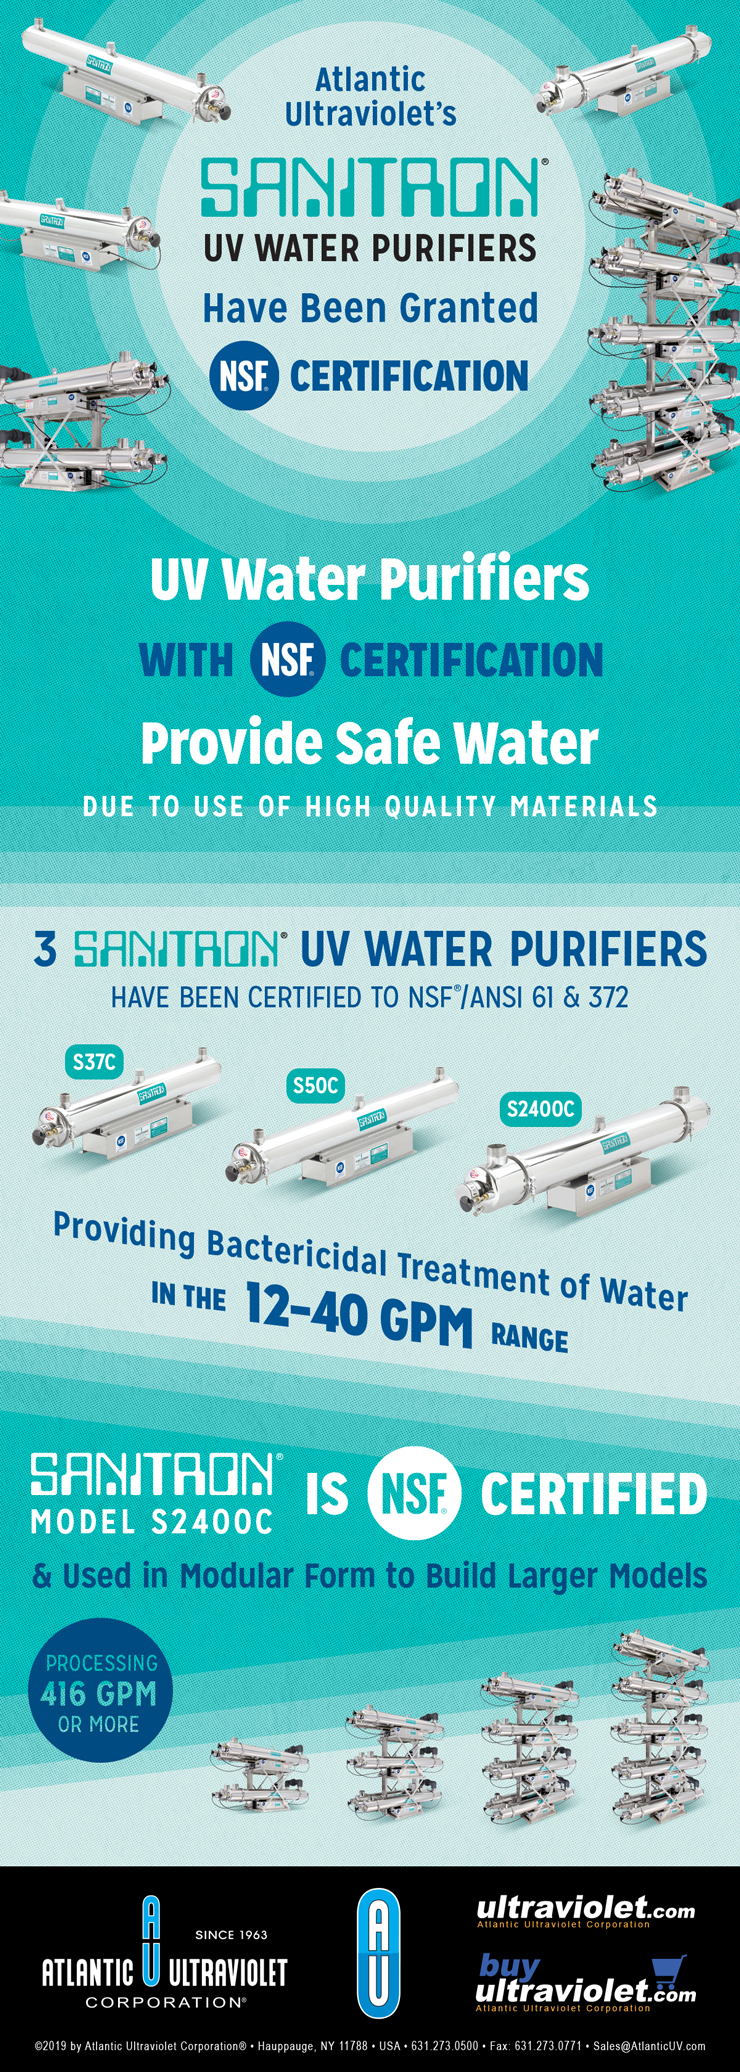 Infographic: Atlantic Ultraviolet's Sanitron NSF UV Water Purifier Models Have Been Granted NSF Certification